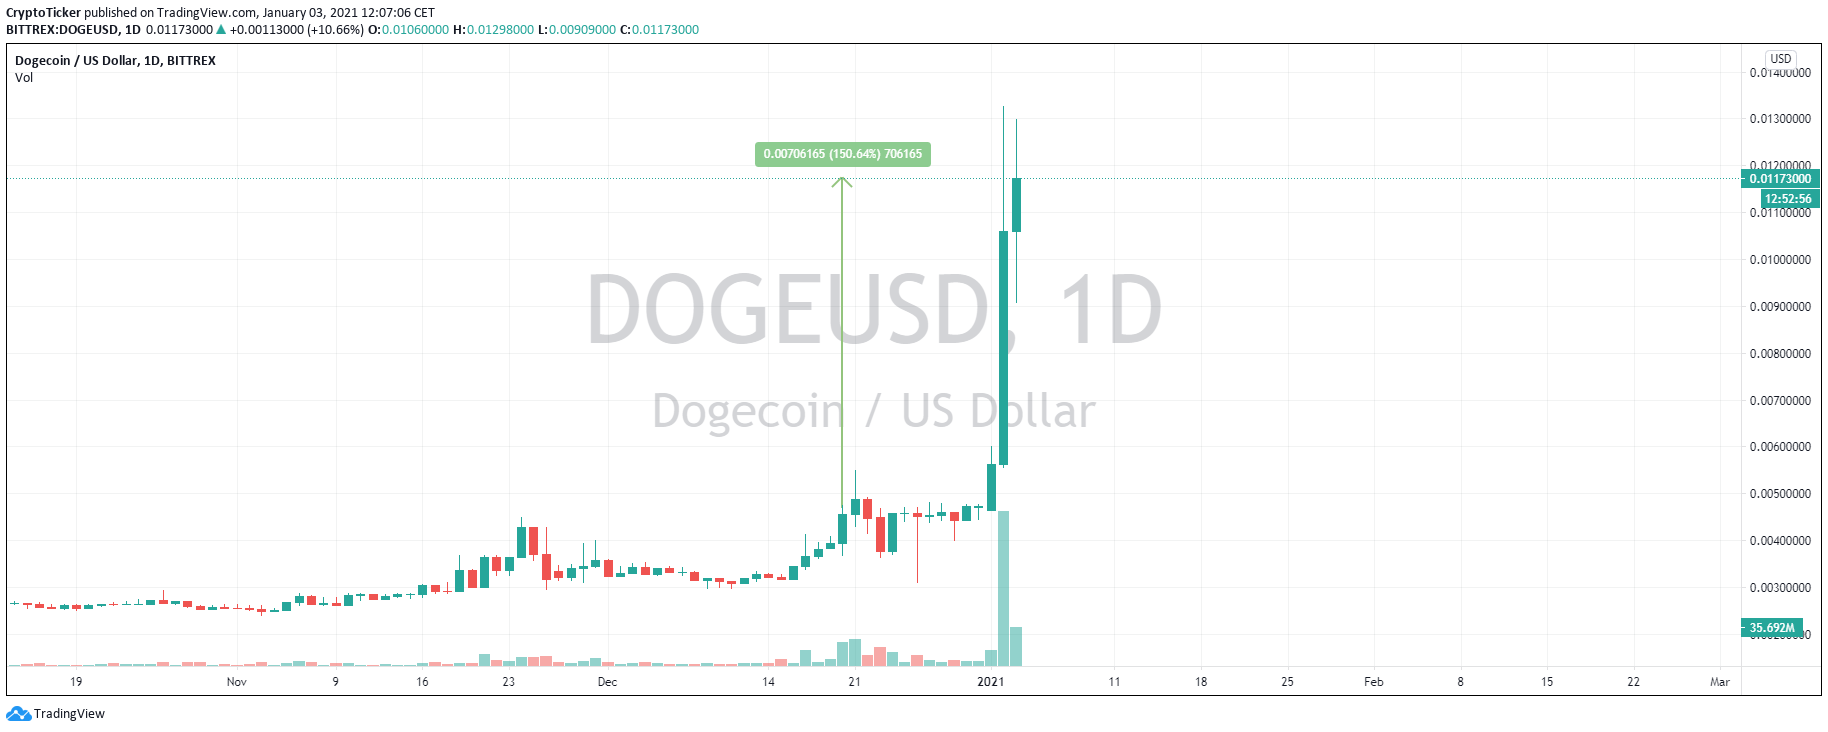 DOGE/USD 1-Day chart showing a price jump of 150% in the last 7 days